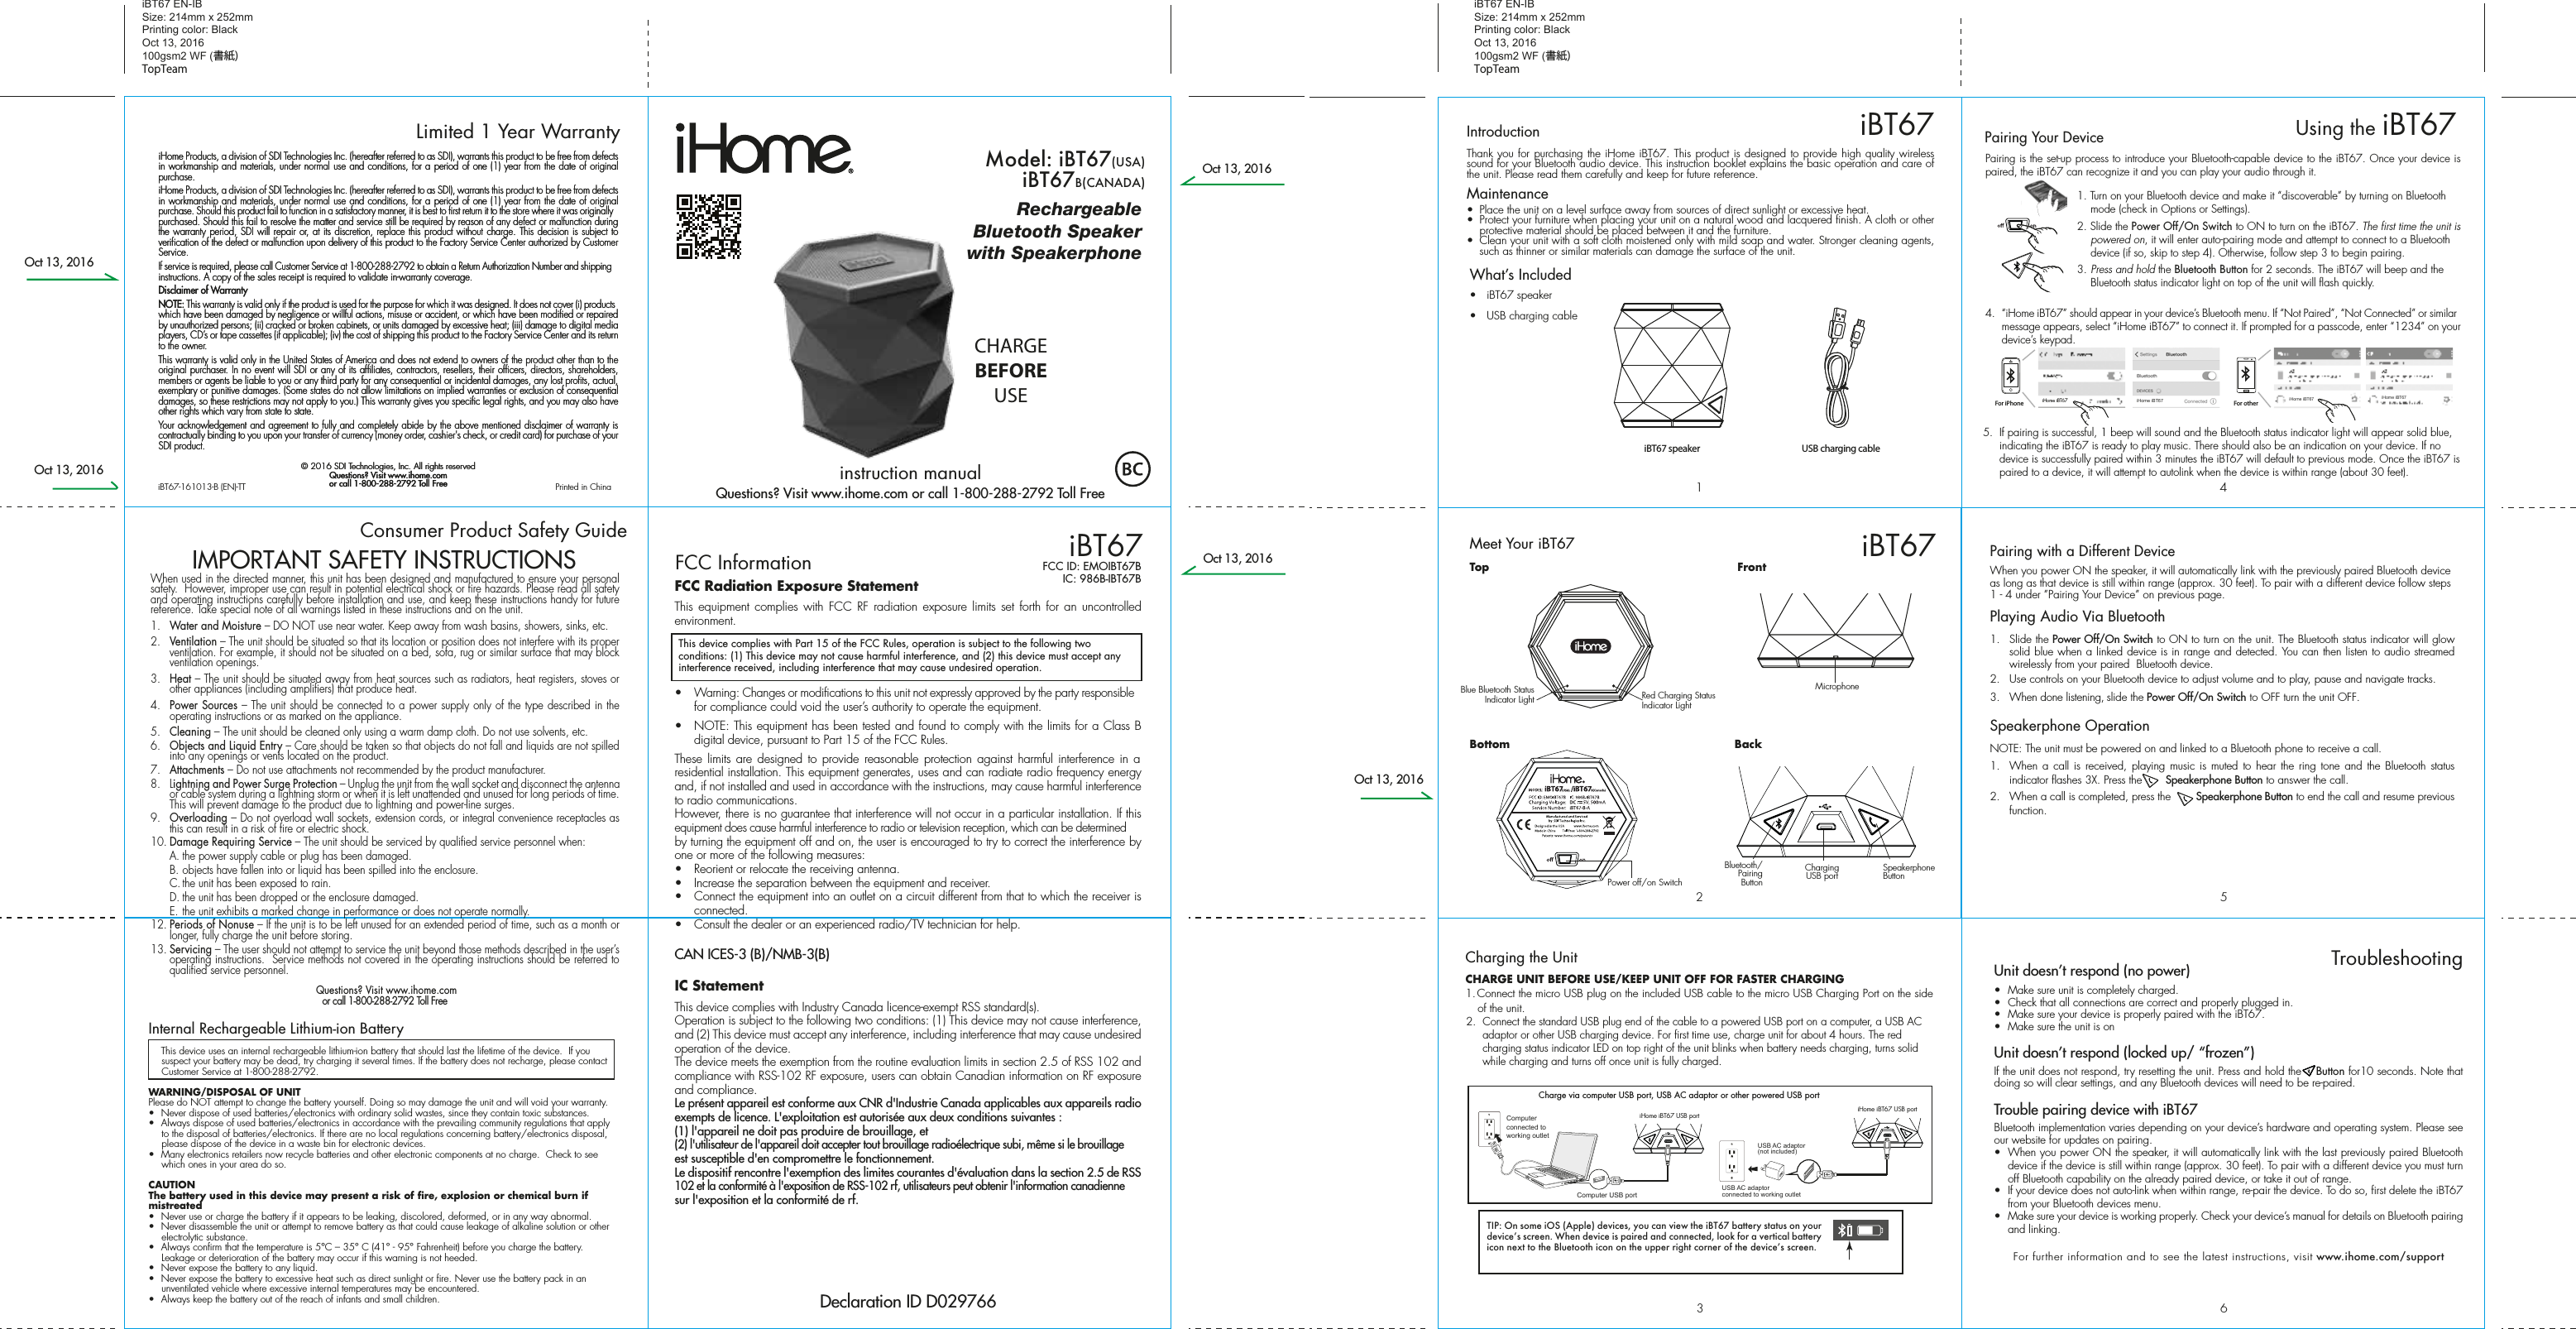 iHome Products, a division of SDI Technologies Inc. (hereafter referred to as SDI), warrants this product to be free from defects in workmanship and materials, under normal use and conditions, for a period of one (1) year from the date of original purchase.iHome Products, a division of SDI Technologies Inc. (hereafter referred to as SDI), warrants this product to be free from defects in workmanship and materials, under normal use and conditions, for a period of one (1) year from the date of original purchase. Should this product fail to function in a satisfactory manner, it is best to first return it to the store where it was originally purchased. Should this fail to resolve the matter and service still be required by reason of any defect or malfunction during the warranty period, SDI will repair or, at its discretion, replace this product without charge. This decision is subject to verification of the defect or malfunction upon delivery of this product to the Factory Service Center authorized by Customer Service.If service is required, please call Customer Service at 1-800-288-2792 to obtain a Return Authorization Number and shipping instructions. A copy of the sales receipt is required to validate in-warranty coverage.Disclaimer of WarrantyNOTE: This warranty is valid only if the product is used for the purpose for which it was designed. It does not cover (i) products which have been damaged by negligence or willful actions, misuse or accident, or which have been modified or repaired by unauthorized persons; (ii) cracked or broken cabinets, or units damaged by excessive heat; (iii) damage to digital media players, CD’s or tape cassettes (if applicable); (iv) the cost of shipping this product to the Factory Service Center and its return to the owner.This warranty is valid only in the United States of America and does not extend to owners of the product other than to the original purchaser. In no event will SDI or any of its affiliates, contractors, resellers, their officers, directors, shareholders, members or agents be liable to you or any third party for any consequential or incidental damages, any lost profits, actual, exemplary or punitive damages. (Some states do not allow limitations on implied warranties or exclusion of consequential damages, so these restrictions may not apply to you.) This warranty gives you specific legal rights, and you may also have other rights which vary from state to state.Your acknowledgement and agreement to fully and completely abide by the above mentioned disclaimer of warranty is contractually binding to you upon your transfer of currency (money order, cashier&apos;s check, or credit card) for purchase of your SDI product.© 2016 SDI Technologies, Inc. All rights reservedQuestions? Visit www.ihome.comor call 1-800-288-2792 Toll FreeiHome Products, a division of SDI Technologies Inc. (hereafter referred to as SDI), warrants this product to be free from defects in workmanship and materials, under normal use and conditions, for a period of one (1) year from the date of original purchase.iHome Products, a division of SDI Technologies Inc. (hereafter referred to as SDI), warrants this product to be free from defects in workmanship and materials, under normal use and conditions, for a period of one (1) year from the date of original purchase. Should this product fail to function in a satisfactory manner, it is best to first return it to the store where it was originally purchased. Should this fail to resolve the matter and service still be required by reason of any defect or malfunction during the warranty period, SDI will repair or, at its discretion, replace this product without charge. This decision is subject to verification of the defect or malfunction upon delivery of this product to the Factory Service Center authorized by Customer Service.If service is required, please call Customer Service at 1-800-288-2792 to obtain a Return Authorization Number and shipping instructions. A copy of the sales receipt is required to validate in-warranty coverage.Disclaimer of WarrantyNOTE: This warranty is valid only if the product is used for the purpose for which it was designed. It does not cover (i) products which have been damaged by negligence or willful actions, misuse or accident, or which have been modified or repaired by unauthorized persons; (ii) cracked or broken cabinets, or units damaged by excessive heat; (iii) damage to digital media players, CD’s or tape cassettes (if applicable); (iv) the cost of shipping this product to the Factory Service Center and its return to the owner.This warranty is valid only in the United States of America and does not extend to owners of the product other than to the original purchaser. In no event will SDI or any of its affiliates, contractors, resellers, their officers, directors, shareholders, members or agents be liable to you or any third party for any consequential or incidental damages, any lost profits, actual, exemplary or punitive damages. (Some states do not allow limitations on implied warranties or exclusion of consequential damages, so these restrictions may not apply to you.) This warranty gives you specific legal rights, and you may also have other rights which vary from state to state.Your acknowledgement and agreement to fully and completely abide by the above mentioned disclaimer of warranty is contractually binding to you upon your transfer of currency (money order, cashier&apos;s check, or credit card) for purchase of your SDI product.© 2016 SDI Technologies, Inc. All rights reservedQuestions? Visit www.ihome.comor call 1-800-288-2792 Toll FreeLimited 1 Year WarrantyiBT67 EN-IB Size: 214mm x 252mmPrinting color: BlackOct 13, 2016100gsm2 WF (書紙)TopTeamiBT67 EN-IB Size: 214mm x 252mmPrinting color: BlackOct 13, 2016100gsm2 WF (書紙)TopTeamConsumer Product Safety Guide8When used in the directed manner, this unit has been designed and manufactured to ensure your personal safety.  However, improper use can result in potential electrical shock or fire hazards. Please read all safety and operating instructions carefully before installation and use, and keep these instructions handy for future reference. Take special note of all warnings listed in these instructions and on the unit. 1.   Water and Moisture – DO NOT use near water. Keep away from wash basins, showers, sinks, etc.2.   Ventilation – The unit should be situated so that its location or position does not interfere with its proper ventilation. For example, it should not be situated on a bed, sofa, rug or similar surface that may block ventilation openings.  3.   Heat – The unit should be situated away from heat sources such as radiators, heat registers, stoves or other appliances (including amplifiers) that produce heat.4.   Power Sources – The unit should be connected to a power supply only of the type described in the operating instructions or as marked on the appliance.5.   Cleaning – The unit should be cleaned only using a warm damp cloth. Do not use solvents, etc.  6.   Objects and Liquid Entry – Care should be taken so that objects do not fall and liquids are not spilled into any openings or vents located on the product.7.   Attachments – Do not use attachments not recommended by the product manufacturer.8.   Lightning and Power Surge Protection – Unplug the unit from the wall socket and disconnect the antenna or cable system during a lightning storm or when it is left unattended and unused for long periods of time. This will prevent damage to the product due to lightning and power-line surges.9.  Overloading – Do not overload wall sockets, extension cords, or integral convenience receptacles as this can result in a risk of fire or electric shock.10. Damage Requiring Service – The unit should be serviced by qualified service personnel when:  A. the power supply cable or plug has been damaged.  B. objects have fallen into or liquid has been spilled into the enclosure.  C. the unit has been exposed to rain.  D. the unit has been dropped or the enclosure damaged.  E. the unit exhibits a marked change in performance or does not operate normally.12. Periods of Nonuse – If the unit is to be left unused for an extended period of time, such as a month or longer, fully charge the unit before storing.13. Servicing – The user should not attempt to service the unit beyond those methods described in the user’s operating instructions.  Service methods not covered in the operating instructions should be referred to qualified service personnel. Questions? Visit www.ihome.comor call 1-800-288-2792 Toll FreeIMPORTANT SAFETY INSTRUCTIONSInternal Rechargeable Lithium-ion Battery   This device uses an internal rechargeable lithium-ion battery that should last the lifetime of the device.  If you suspect your battery may be dead, try charging it several times. If the battery does not recharge, please contact Customer Service at 1-800-288-2792. WARNING/DISPOSAL OF UNITPlease do NOT attempt to change the battery yourself. Doing so may damage the unit and will void your warranty.•  Never dispose of used batteries/electronics with ordinary solid wastes, since they contain toxic substances. •  Always dispose of used batteries/electronics in accordance with the prevailing community regulations that apply to the disposal of batteries/electronics. If there are no local regulations concerning battery/electronics disposal, please dispose of the device in a waste bin for electronic devices.•  Many electronics retailers now recycle batteries and other electronic components at no charge.  Check to see which ones in your area do so.CAUTIONThe battery used in this device may present a risk of fire, explosion or chemical burn if mistreated•  Never use or charge the battery if it appears to be leaking, discolored, deformed, or in any way abnormal.•  Never disassemble the unit or attempt to remove battery as that could cause leakage of alkaline solution or other electrolytic substance.•  Always confirm that the temperature is 5°C – 35° C (41° - 95° Fahrenheit) before you charge the battery. Leakage or deterioration of the battery may occur if this warning is not heeded.•  Never expose the battery to any liquid.•  Never expose the battery to excessive heat such as direct sunlight or fire. Never use the battery pack in an unventilated vehicle where excessive internal temperatures may be encountered.•  Always keep the battery out of the reach of infants and small children.iBT67-161013-B (EN)-TT                                             Printed in ChinaFCC Radiation Exposure StatementThis equipment complies with FCC RF radiation exposure limits set forth for an uncontrolled environment. •  Warning: Changes or modifications to this unit not expressly approved by the party responsible for compliance could void the user’s authority to operate the equipment.•  NOTE: This equipment has been tested and found to comply with the limits for a Class B digital device, pursuant to Part 15 of the FCC Rules.These limits are designed to provide reasonable protection against harmful interference in a residential installation. This equipment generates, uses and can radiate radio frequency energy and, if not installed and used in accordance with the instructions, may cause harmful interference to radio communications.However, there is no guarantee that interference will not occur in a particular installation. If this equipment does cause harmful interference to radio or television reception, which can be determined by turning the equipment off and on, the user is encouraged to try to correct the interference by one or more of the following measures:•  Reorient or relocate the receiving antenna.•  Increase the separation between the equipment and receiver.•  Connect the equipment into an outlet on a circuit different from that to which the receiver is connected.•  Consult the dealer or an experienced radio/TV technician for help.CAN ICES-3 (B)/NMB-3(B)IC StatementThis device complies with Industry Canada licence-exempt RSS standard(s).Operation is subject to the following two conditions: (1) This device may not cause interference, and (2) This device must accept any interference, including interference that may cause undesired operation of the device.The device meets the exemption from the routine evaluation limits in section 2.5 of RSS 102 and compliance with RSS-102 RF exposure, users can obtain Canadian information on RF exposure and compliance.Le présent appareil est conforme aux CNR d&apos;Industrie Canada applicables aux appareils radio exempts de licence. L&apos;exploitation est autorisée aux deux conditions suivantes :(1) l&apos;appareil ne doit pas produire de brouillage, et(2) l&apos;utilisateur de l&apos;appareil doit accepter tout brouillage radioélectrique subi, même si le brouillage est susceptible d&apos;en compromettre le fonctionnement.Le dispositif rencontre l&apos;exemption des limites courantes d&apos;évaluation dans la section 2.5 de RSS 102 et la conformité à l&apos;exposition de RSS-102 rf, utilisateurs peut obtenir l&apos;information canadienne sur l&apos;exposition et la conformité de rf.RechargeableBluetooth Speakerwith SpeakerphoneModel: iBT67(USA)Model: iBT67B(CANADA)CHARGEBEFOREUSEiBT67FCC InformationThis device complies with Part 15 of the FCC Rules, operation is subject to the following two conditions: (1) This device may not cause harmful interference, and (2) this device must accept any interference received, including interference that may cause undesired operation.FCC ID: EMOIBT67BIC: 986B-IBT67BDeclaration ID D029766What’s Included •  iBT67 speaker•  USB charging cableiBT67 speaker564123iBT67Meet Your iBT67Pairing with a Different DeviceWhen you power ON the speaker, it will automatically link with the previously paired Bluetooth device as long as that device is still within range (approx. 30 feet). To pair with a different device follow steps 1 - 4 under ”Pairing Your Device” on previous page.Playing Audio Via Bluetooth 1. Slide the Power Off/On Switch to ON to turn on the unit. The Bluetooth status indicator will glow solid blue when a linked device is in range and detected. You can then listen to audio streamed wirelessly from your paired  Bluetooth device.2.  Use controls on your Bluetooth device to adjust volume and to play, pause and navigate tracks.  3.  When done listening, slide the Power Off/On Switch to OFF turn the unit OFF. Speakerphone OperationNOTE: The unit must be powered on and linked to a Bluetooth phone to receive a call.1.  When a call is received, playing music is muted to hear the ring tone and the Bluetooth status indicator flashes 3X. Press the       Speakerphone Button to answer the call. 2.  When a call is completed, press the        Speakerphone Button to end the call and resume previous function.Unit doesn’t respond (no power) •  Make sure unit is completely charged. •  Check that all connections are correct and properly plugged in. •  Make sure your device is properly paired with the iBT67.•  Make sure the unit is onUnit doesn’t respond (locked up/ “frozen”)If the unit does not respond, try resetting the unit. Press and hold the    Button for10 seconds. Note that doing so will clear settings, and any Bluetooth devices will need to be re-paired.Trouble pairing device with iBT67Bluetooth implementation varies depending on your device’s hardware and operating system. Please see our website for updates on pairing. •  When you power ON the speaker, it will automatically link with the last previously paired Bluetooth   device if the device is still within range (approx. 30 feet). To pair with a different device you must turn off Bluetooth capability on the already paired device, or take it out of range.•  If your device does not auto-link when within range, re-pair the device. To do so, first delete the iBT67    from your Bluetooth devices menu. •  Make sure your device is working properly. Check your device’s manual for details on Bluetooth pairing and linking. For further information and to see the latest instructions, visit www.ihome.com/supportTroubleshootingUSB charging cableBottomTopRed Charging Status Indicator LightBlue Bluetooth Status Indicator LightBackBluetooth/Pairing ButtonSpeakerphone ButtonChargingUSB portCharging the UnitCHARGE UNIT BEFORE USE/KEEP UNIT OFF FOR FASTER CHARGING1. Connect the micro USB plug on the included USB cable to the micro USB Charging Port on the side of the unit. 2.  Connect the standard USB plug end of the cable to a powered USB port on a computer, a USB AC adaptor or other USB charging device. For first time use, charge unit for about 4 hours. The red charging status indicator LED on top right of the unit blinks when battery needs charging, turns solid while charging and turns off once unit is fully charged.iHome iBT67 USB port iHome iBT67 USB portCharge via computer USB port, USB AC adaptor or other powered USB portComputer USB portComputer connected to working outletUSB AC adaptor(not included)USB AC adaptor connected to working outletPairing is the set-up process to introduce your Bluetooth-capable device to the iBT67. Once your device is paired, the iBT67 can recognize it and you can play your audio through it. 1. Turn on your Bluetooth device and make it “discoverable” by turning on Bluetooth mode (check in Options or Settings).2. Slide the Power Off/On Switch to ON to turn on the iBT67. The first time the unit is powered on, it will enter auto-pairing mode and attempt to connect to a Bluetooth device (if so, skip to step 4). Otherwise, follow step 3 to begin pairing.3.  Press and hold the Bluetooth Button for 2 seconds. The iBT67 will beep and the Bluetooth status indicator light on top of the unit will flash quickly. 4.  “iHome iBT67” should appear in your device’s Bluetooth menu. If “Not Paired”, “Not Connected” or similar message appears, select “iHome iBT67” to connect it. If prompted for a passcode, enter “1234” on your device’s keypad.Using the iBT67iBT675.  If pairing is successful, 1 beep will sound and the Bluetooth status indicator light will appear solid blue, indicating the iBT67 is ready to play music. There should also be an indication on your device. If no device is successfully paired within 3 minutes the iBT67 will default to previous mode. Once the iBT67 is paired to a device, it will attempt to autolink when the device is within range (about 30 feet). Pairing Your Device  For iPhoneiHome iBT67 iHome iBT67iHome iBT67 iHome iBT67For otherFrontMicrophoneTIP: On some iOS (Apple) devices, you can view the iBT67 battery status on your deviceʼs screen. When device is paired and connected, look for a vertical battery icon next to the Bluetooth icon on the upper right corner of the deviceʼs screen.Thank you for purchasing the iHome iBT67. This product is designed to provide high quality wireless sound for your Bluetooth audio device. This instruction booklet explains the basic operation and care of the unit. Please read them carefully and keep for future reference.Maintenance•  Place the unit on a level surface away from sources of direct sunlight or excessive heat.•  Protect your furniture when placing your unit on a natural wood and lacquered finish. A cloth or other protective material should be placed between it and the furniture.•  Clean your unit with a soft cloth moistened only with mild soap and water. Stronger cleaning agents, such as thinner or similar materials can damage the surface of the unit.IntroductionPower off/on Switchinstruction manualQuestions? Visit www.ihome.com or call 1-800-288-2792 Toll FreeOct 13, 2016Oct 13, 2016Oct 13, 2016Oct 13, 2016Oct 13, 2016